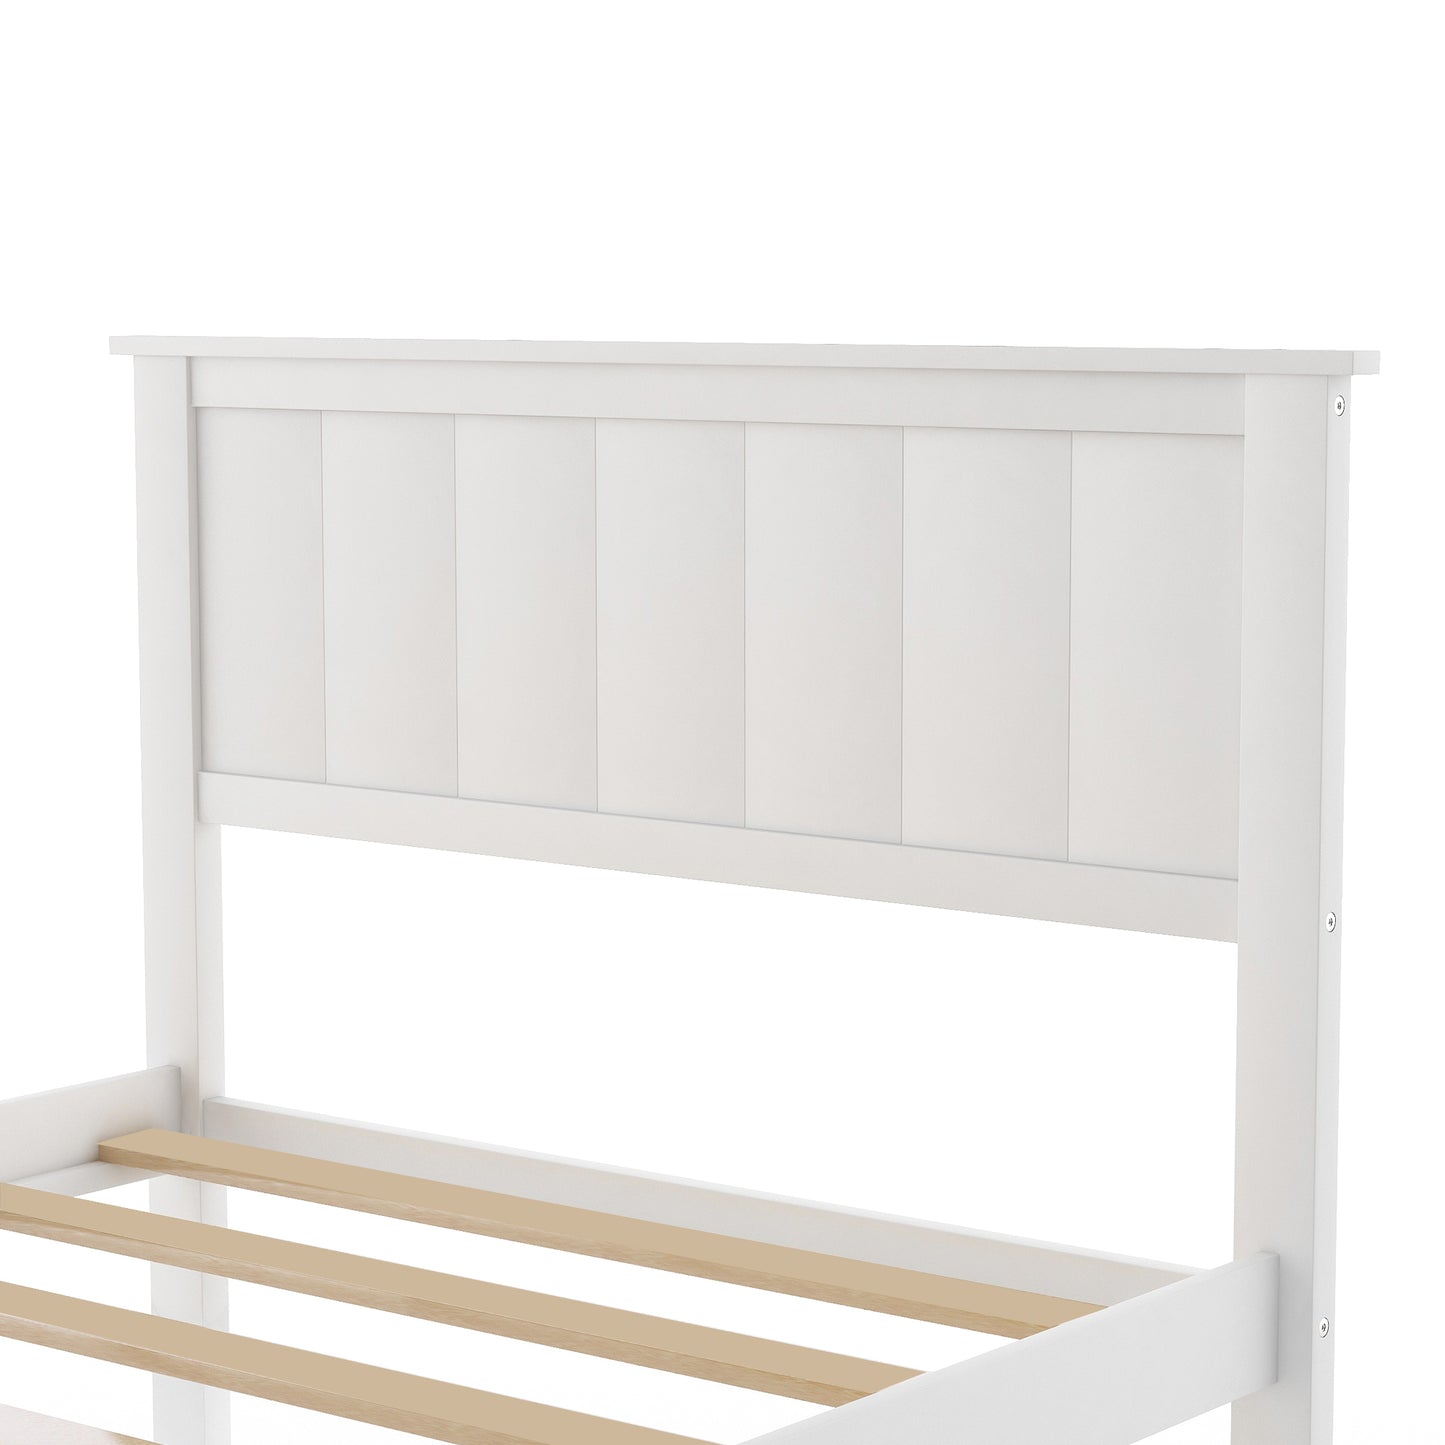 Twin Size Platform Bed with Under-bed Drawer, White